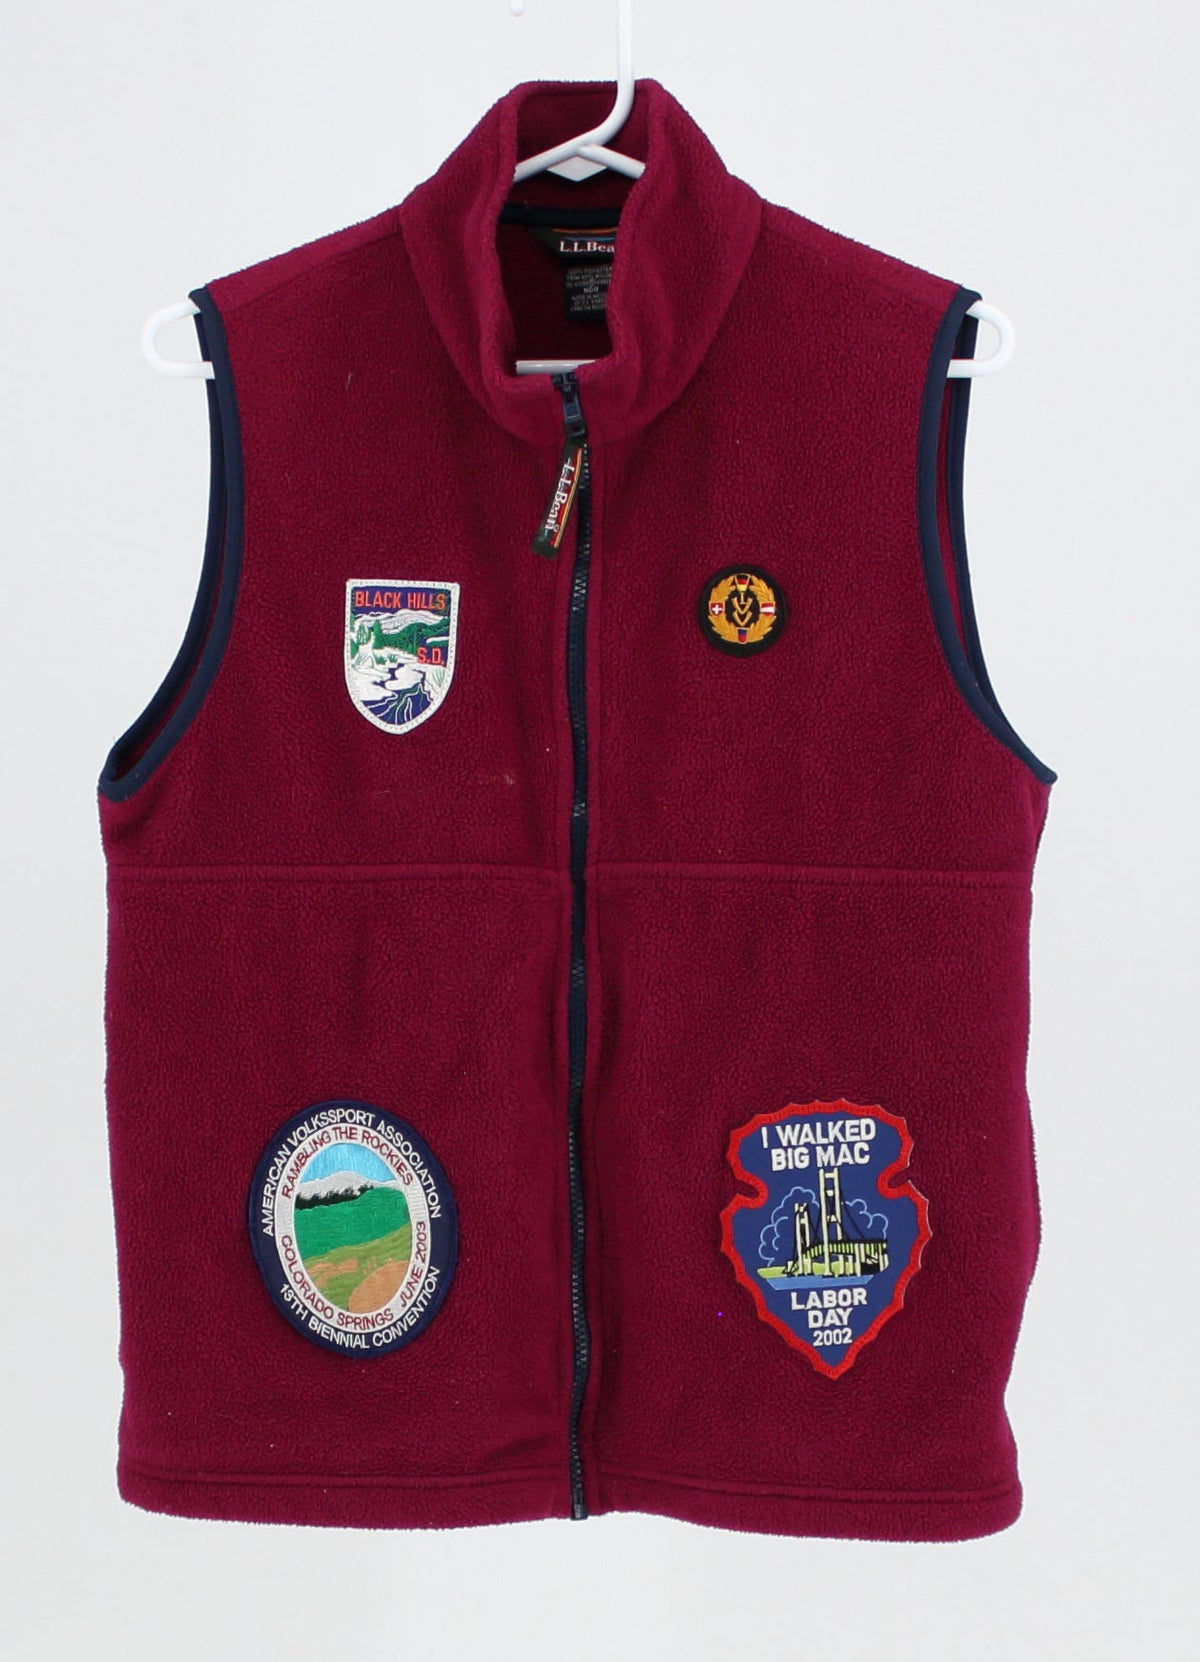 L.L.Bean Burgundy Fleece Vest with Patches on front